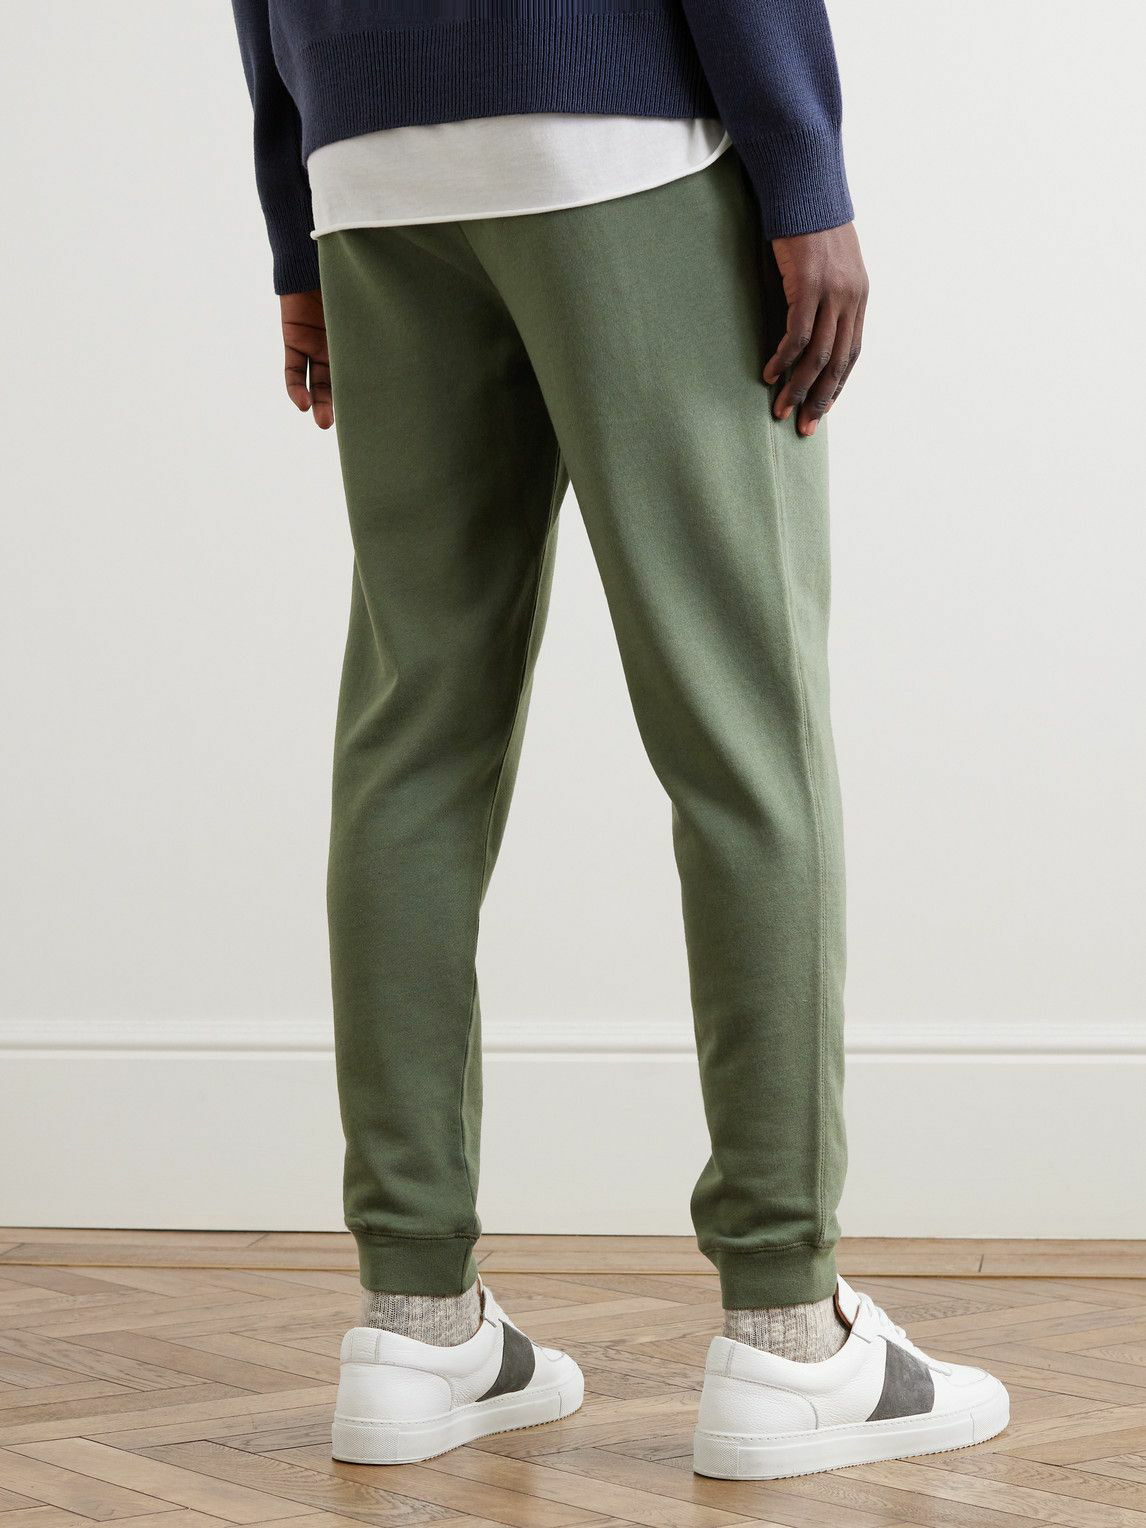 Quinn Slim-Fit Tapered Cotton and Modal-Blend Jersey Sweatpants